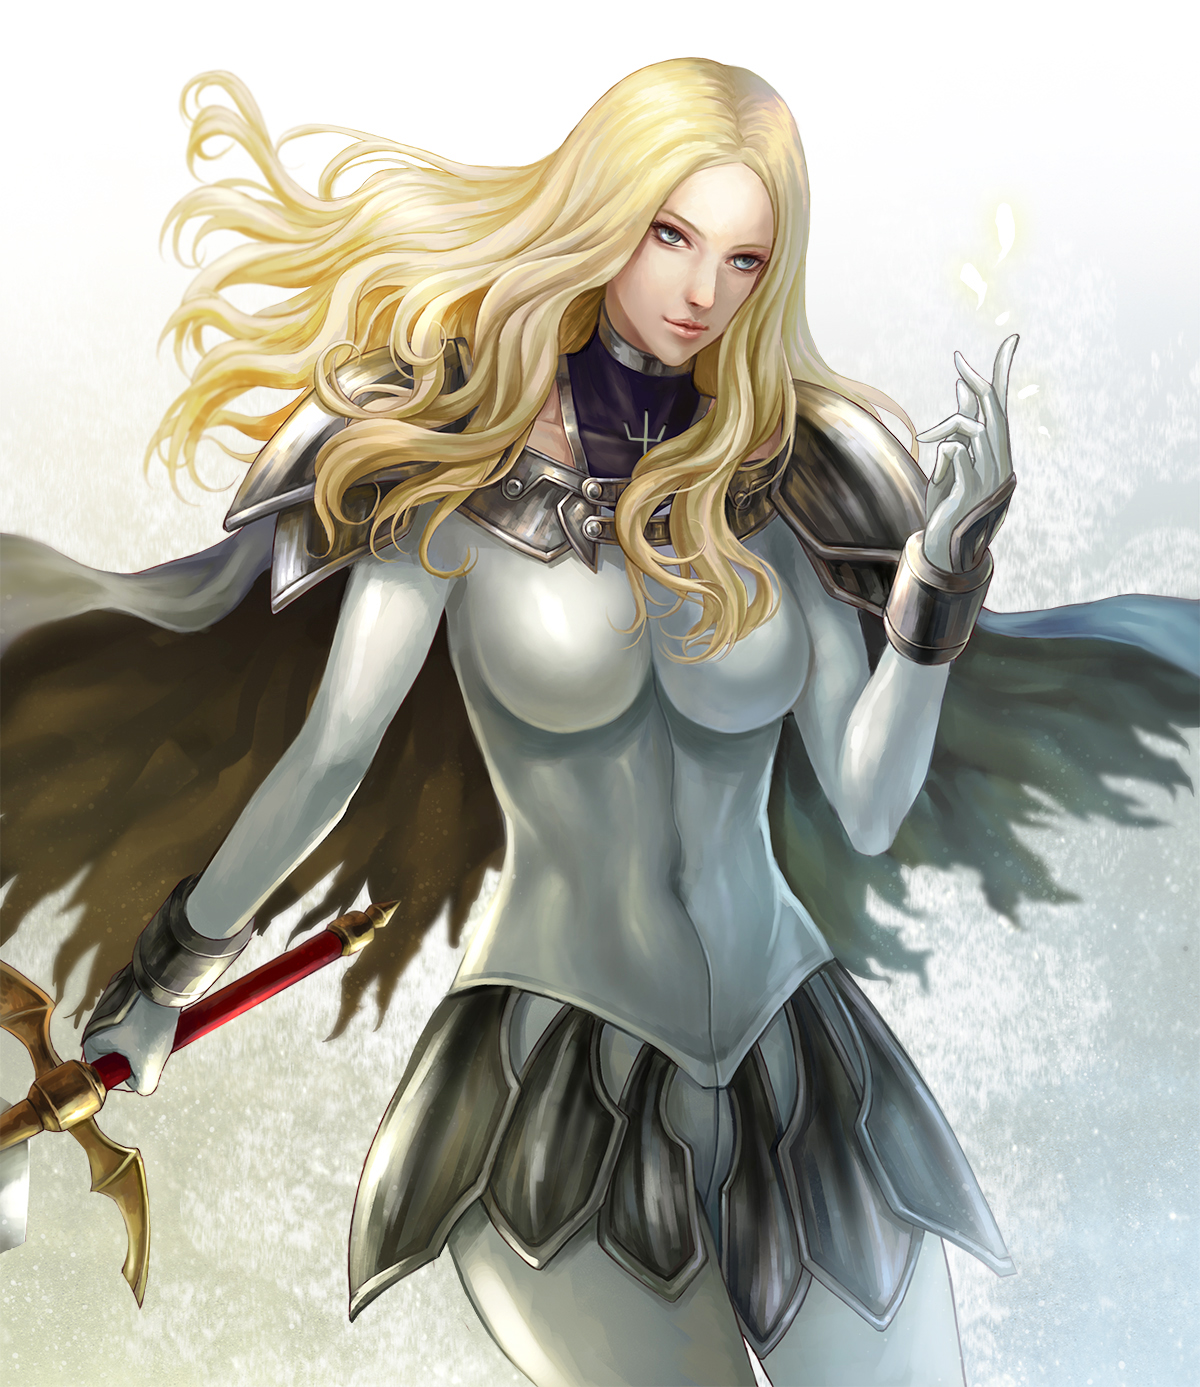 Anime 1200x1387 Claymore (anime) anime girls 2D women with swords big boobs bodysuit female warrior armor thighs looking at viewer long hair belly button Teresa (Claymore) gray eyes fan art smiling figure-hugging armor blonde